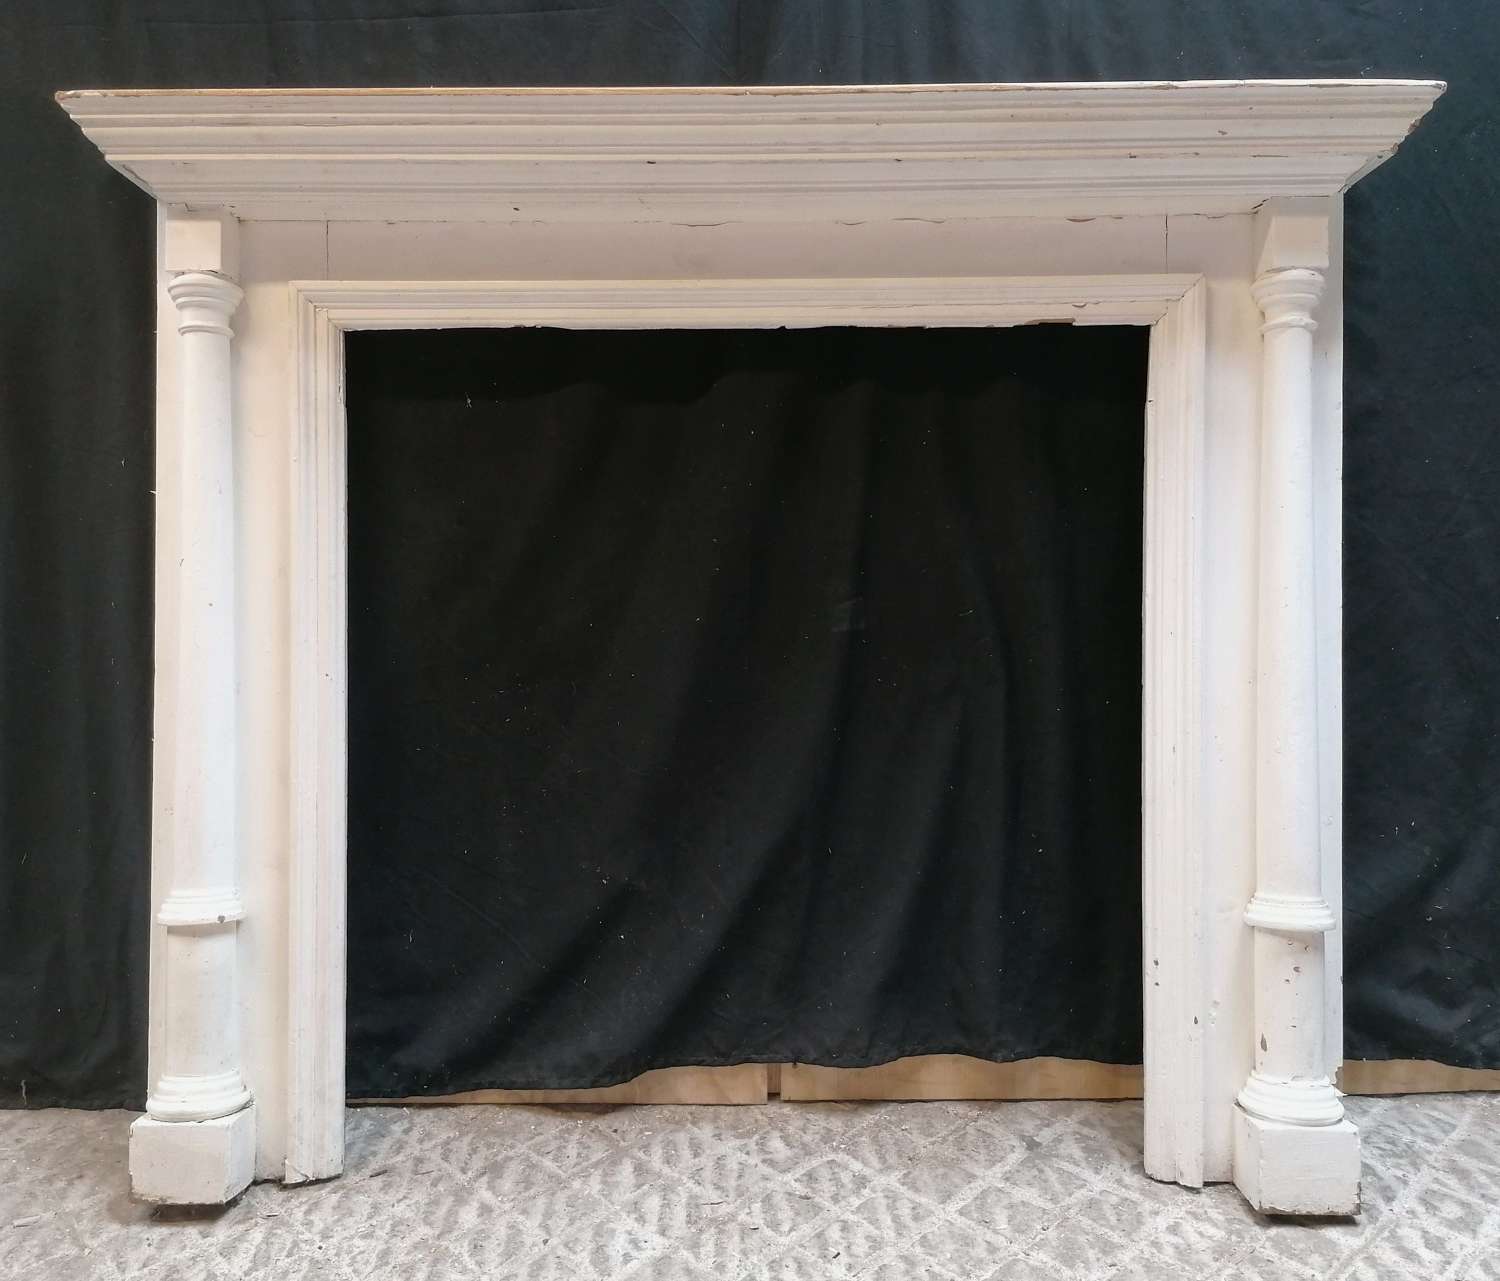 FS0158 A LARGE DECORATIVE RECLAIMED PAINTED PINE FIRE SURROUND